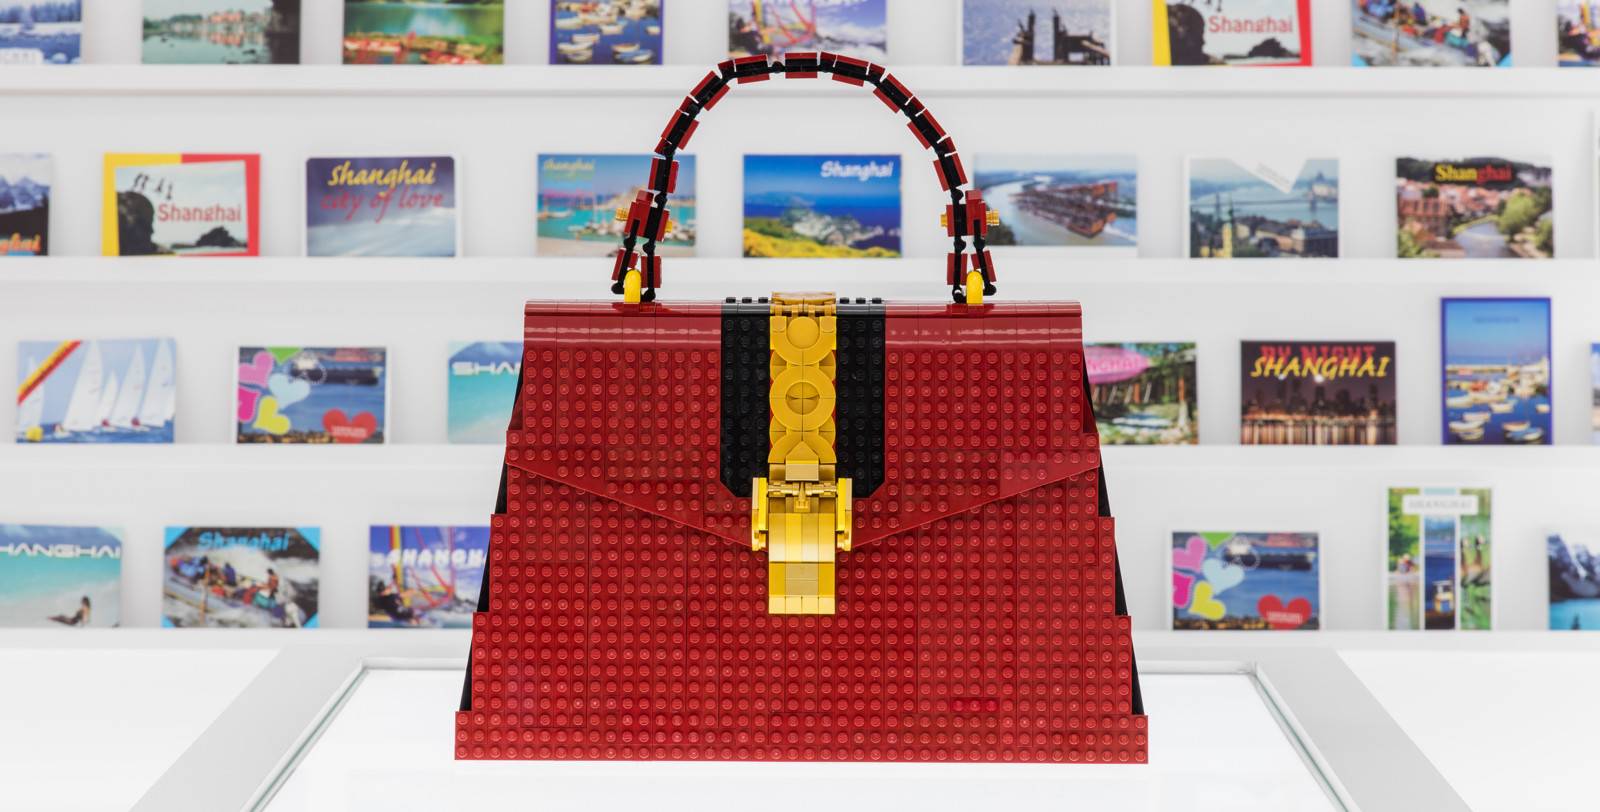 These artist-designed handbags are instant collectors items